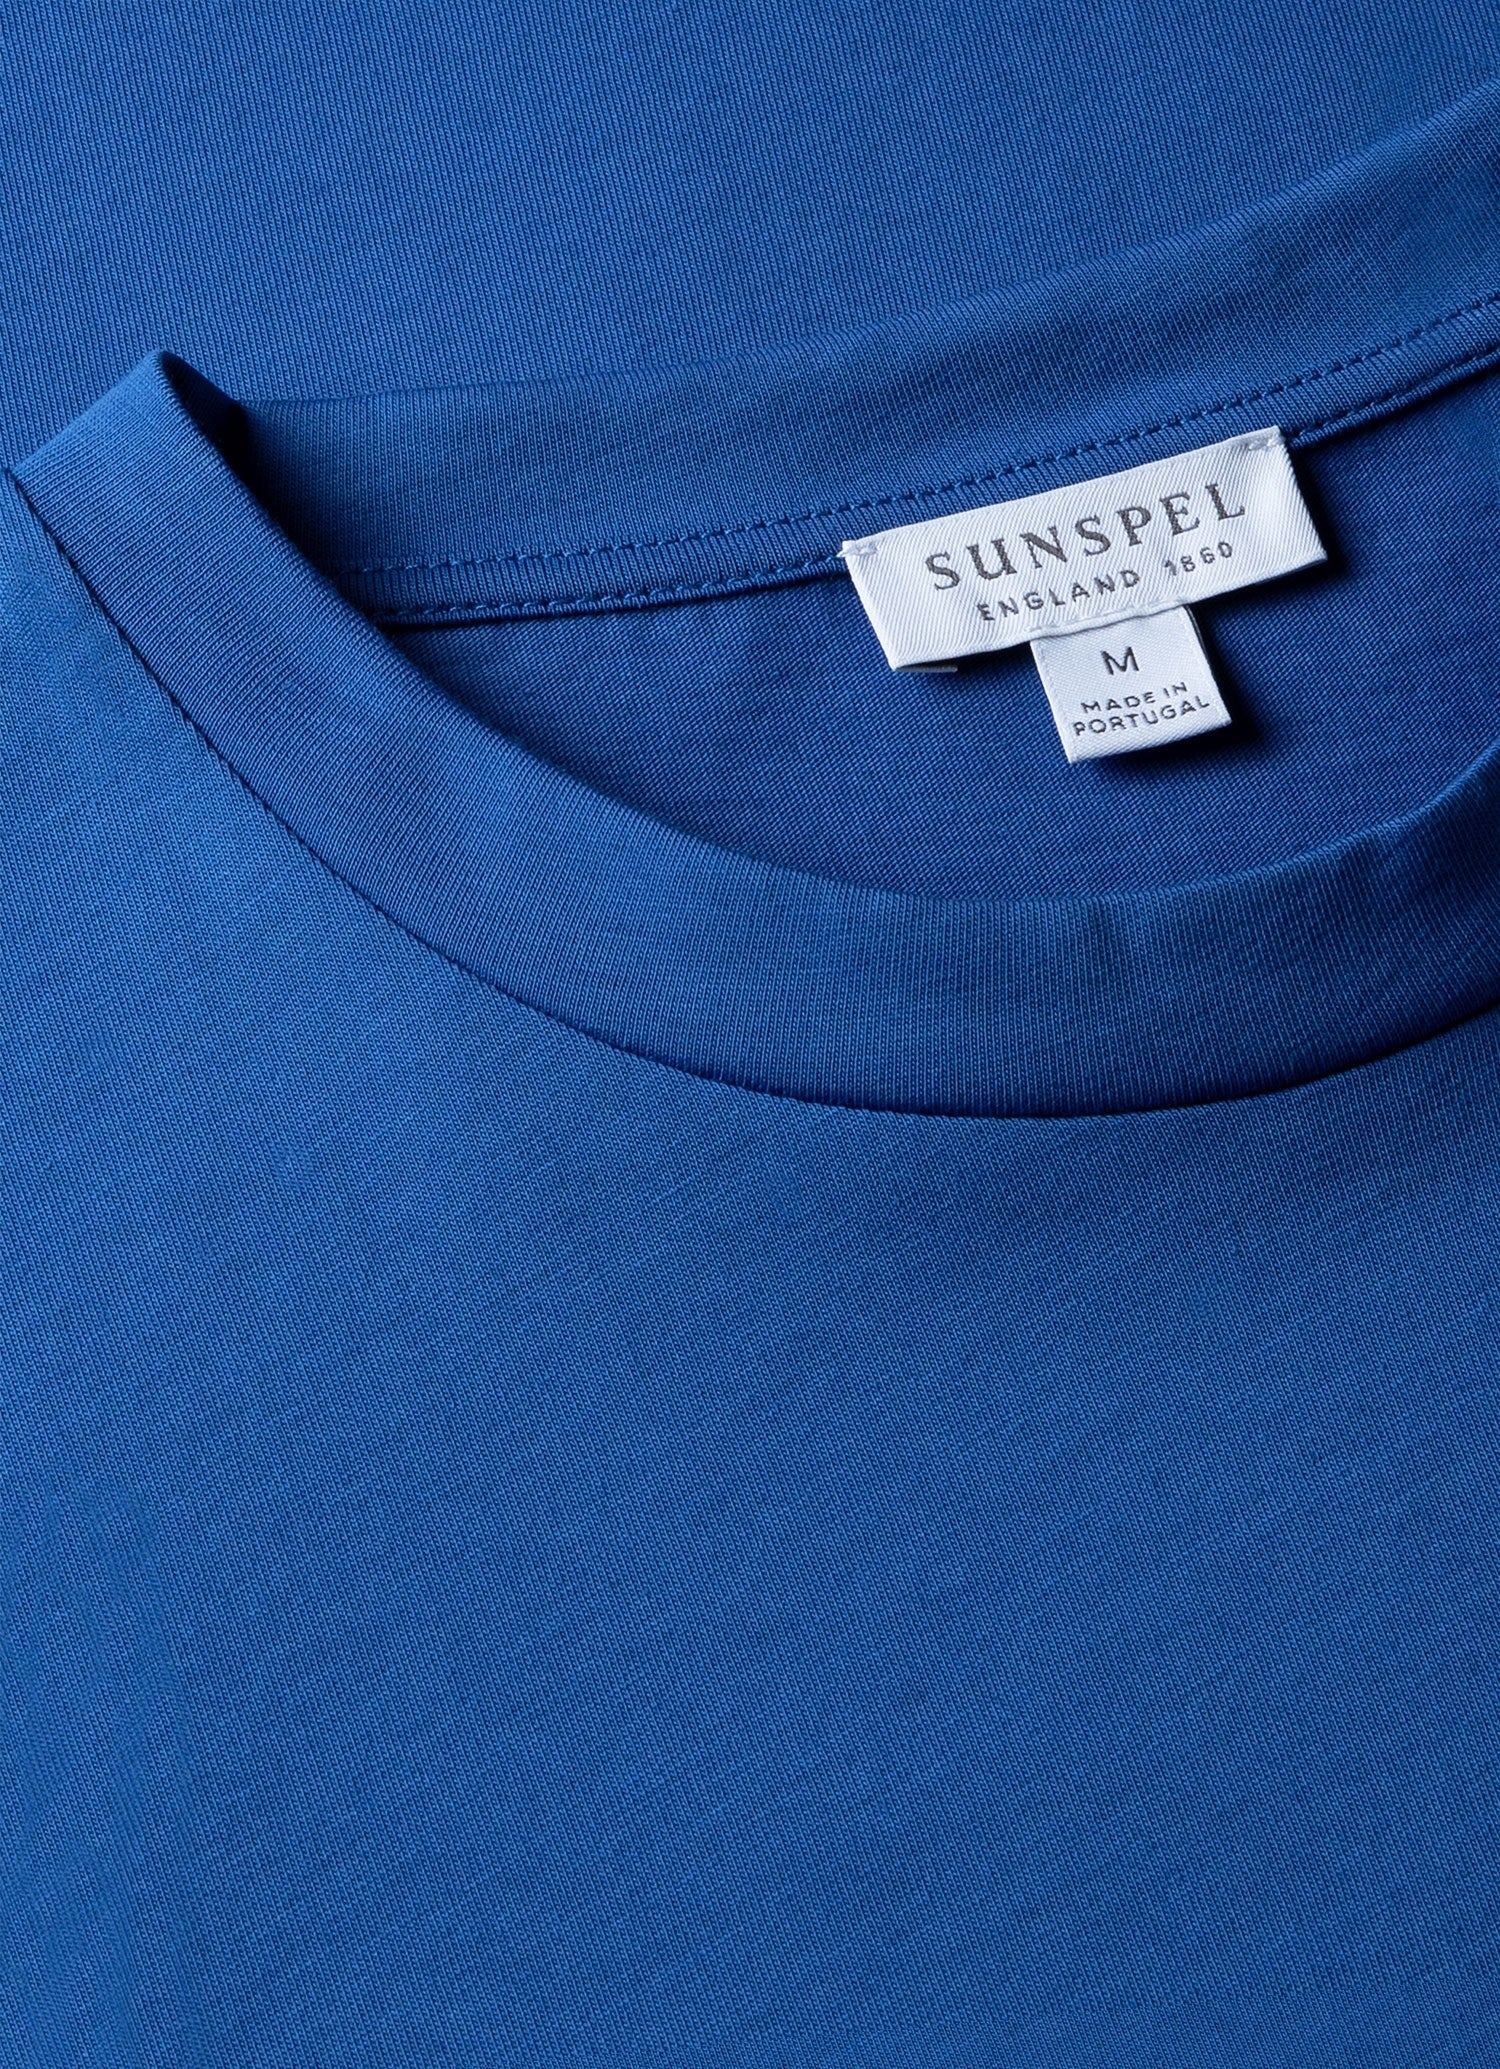 Men's Riviera Midweight T-shirt in French Blue